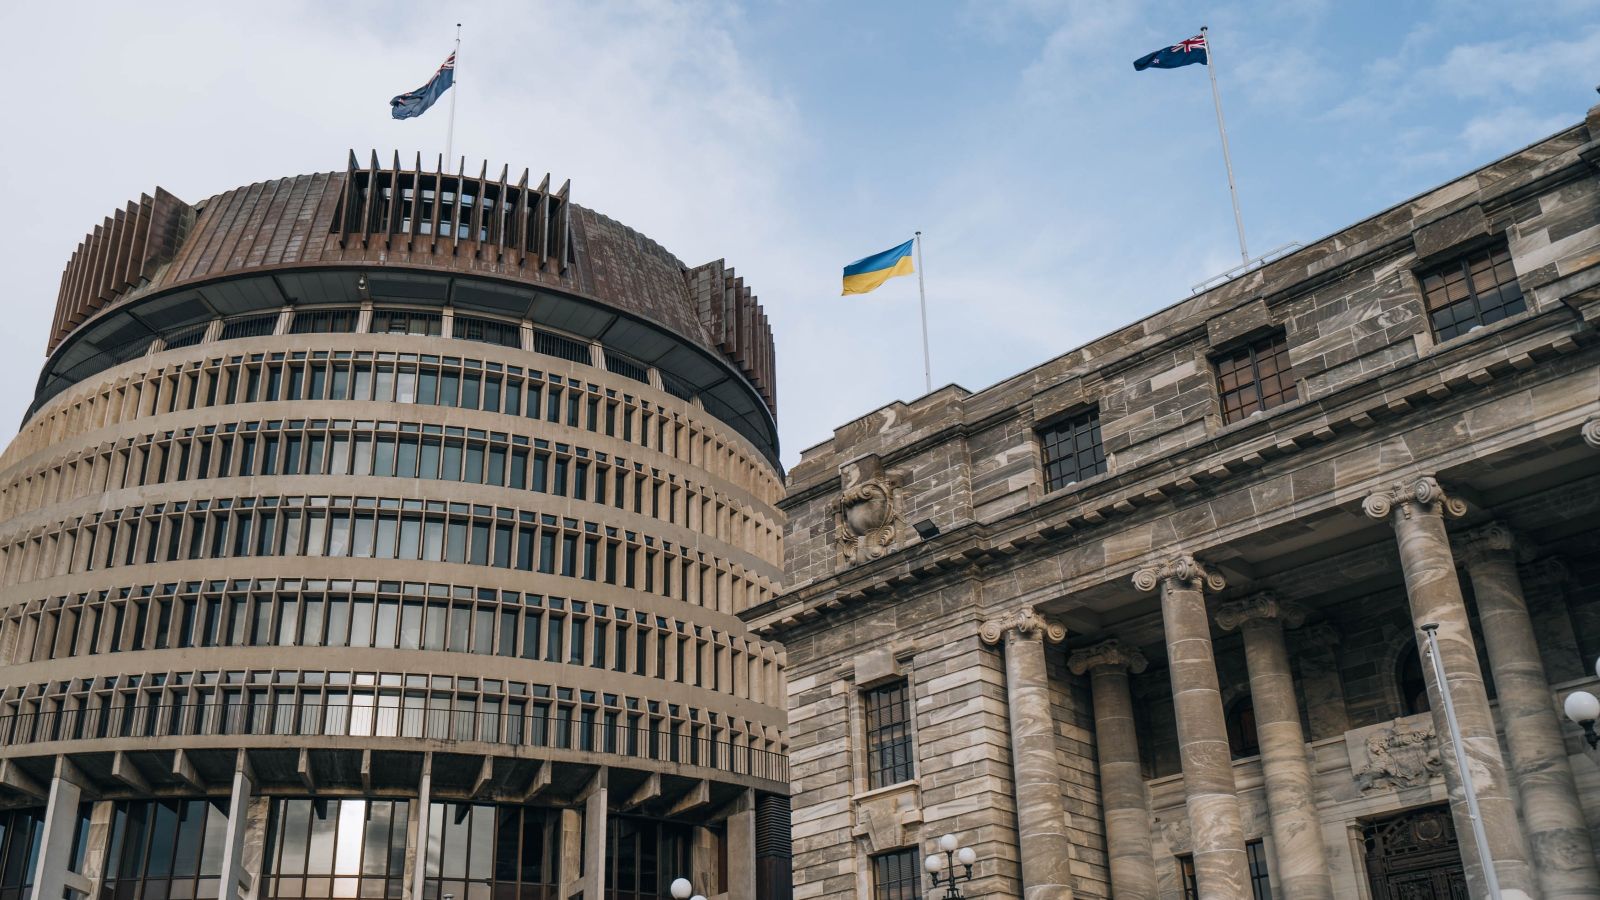 Circular building on left, old stone building on right, NZ flag on pole